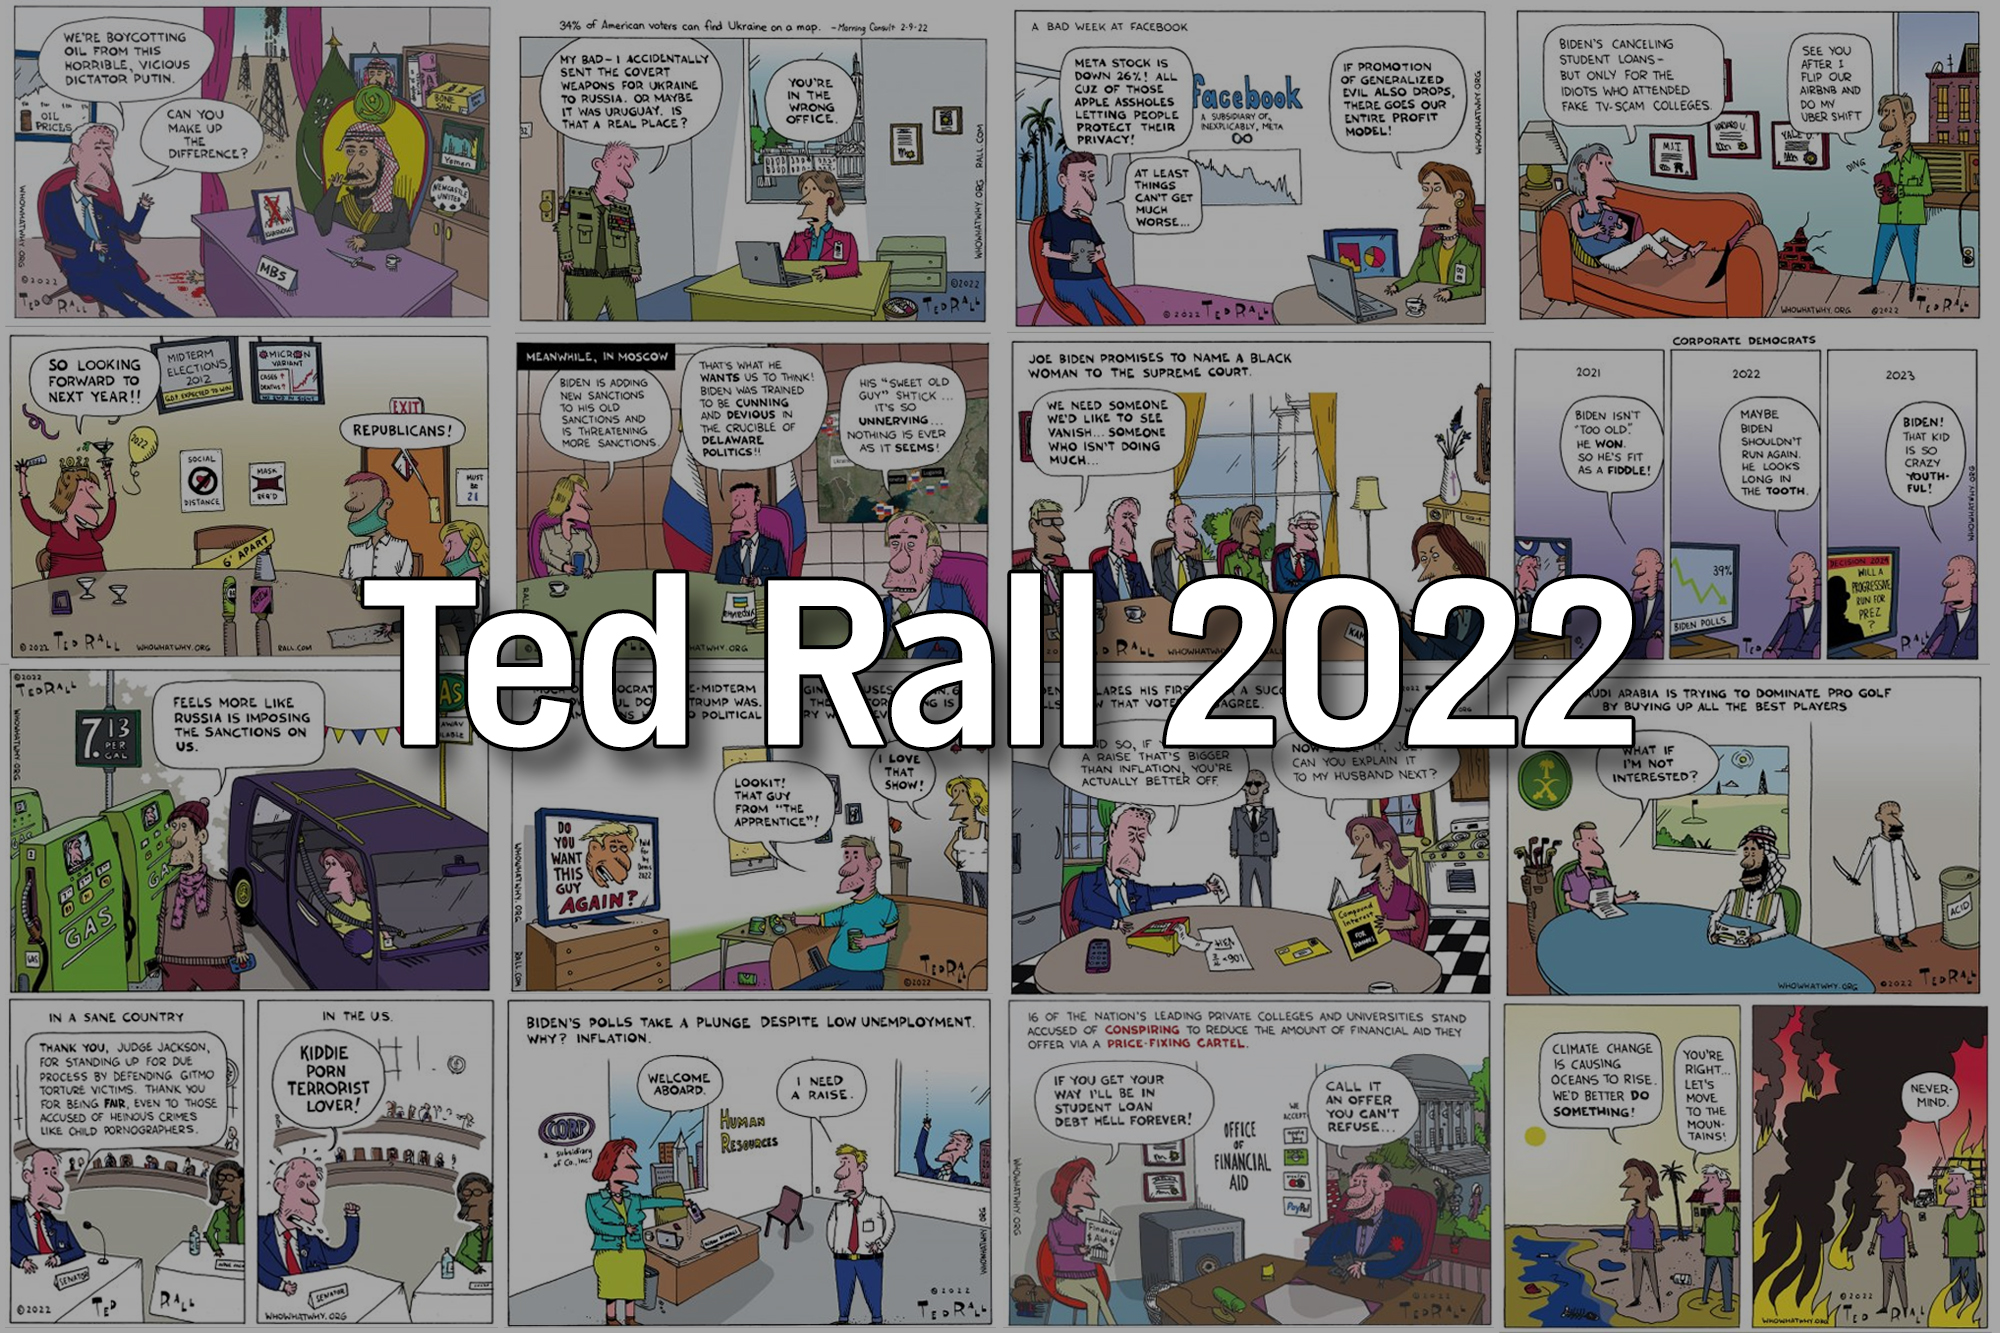 Ted Rall, political cartoons